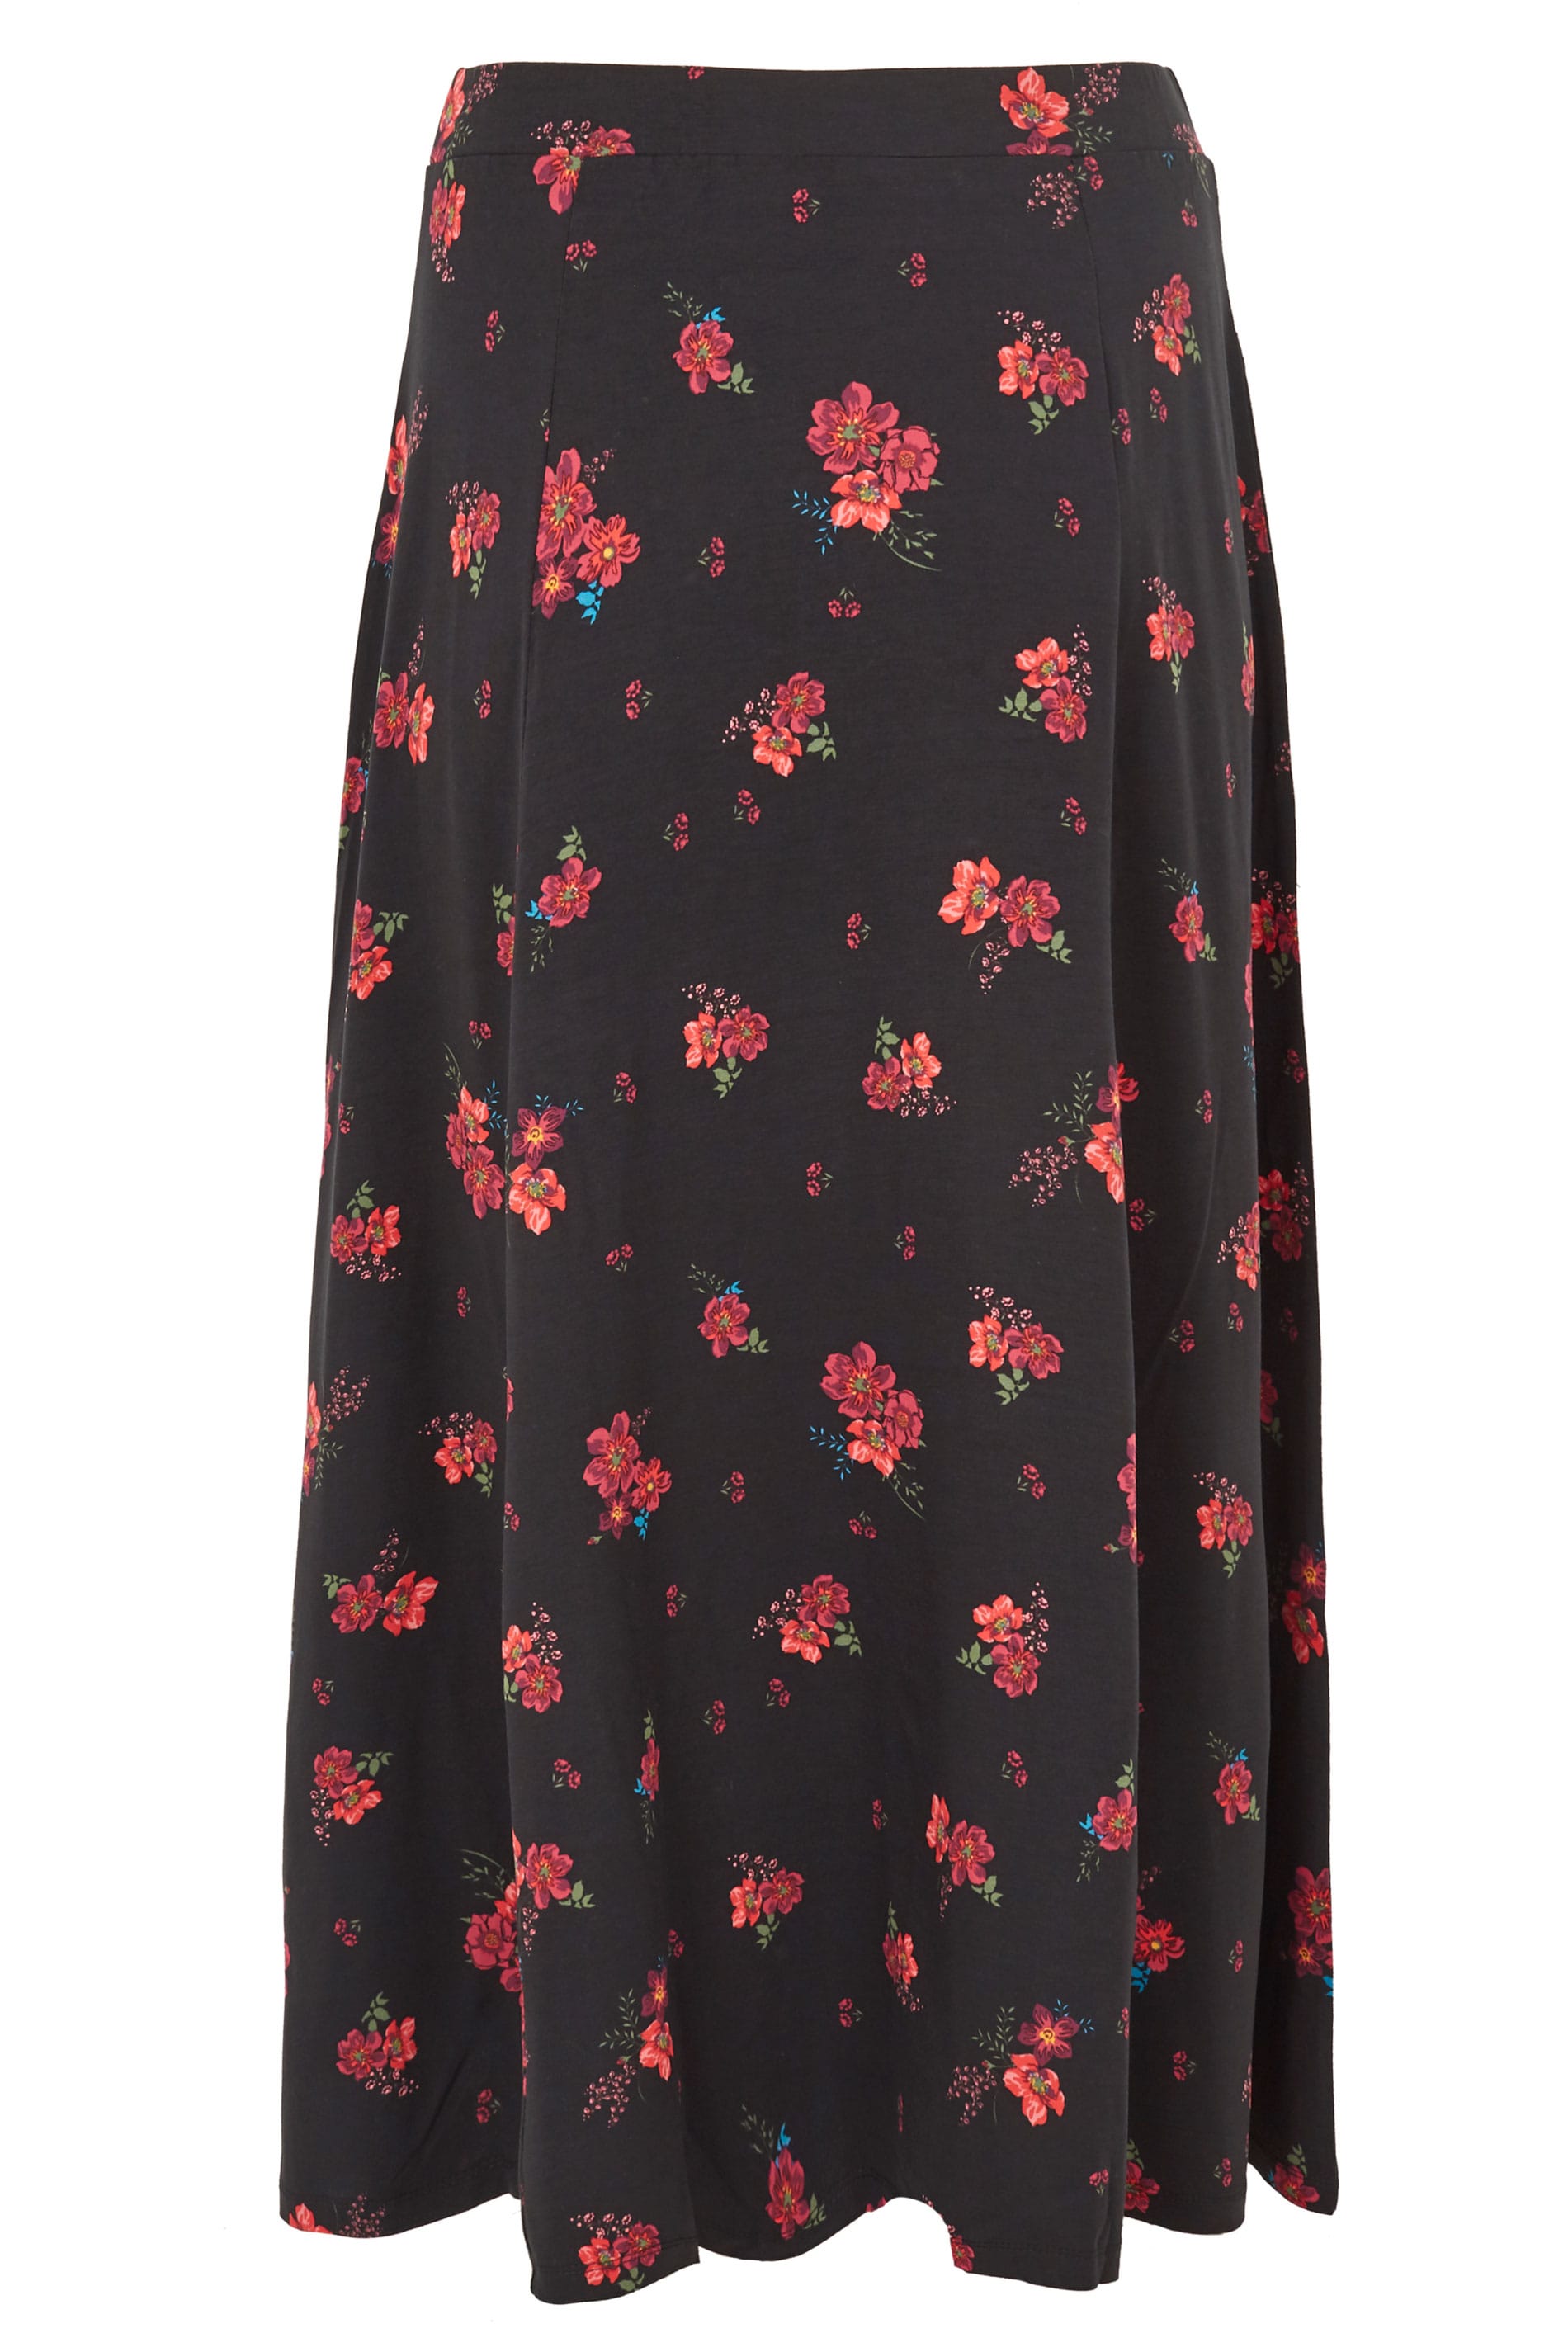 Black & Red Floral Maxi Skirt With Pockets, Plus size 16 to 36